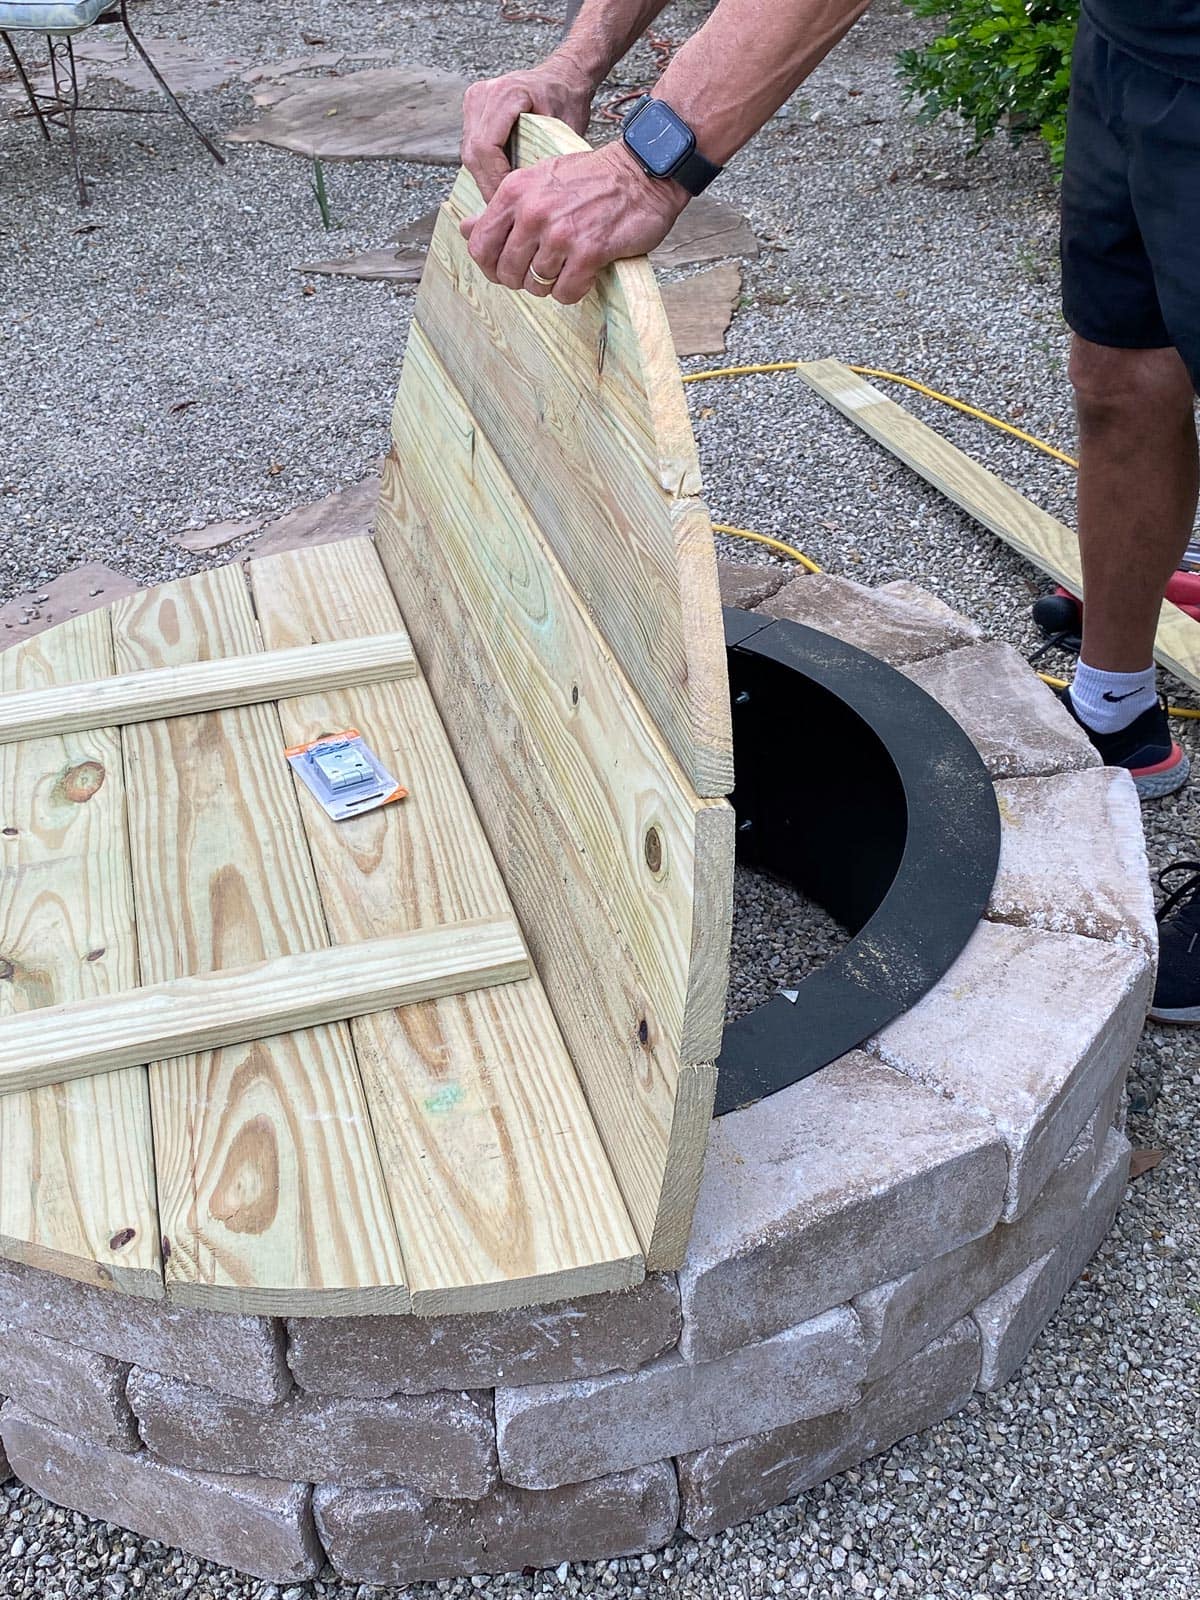 hinged lid for the outdoor fire pit cover